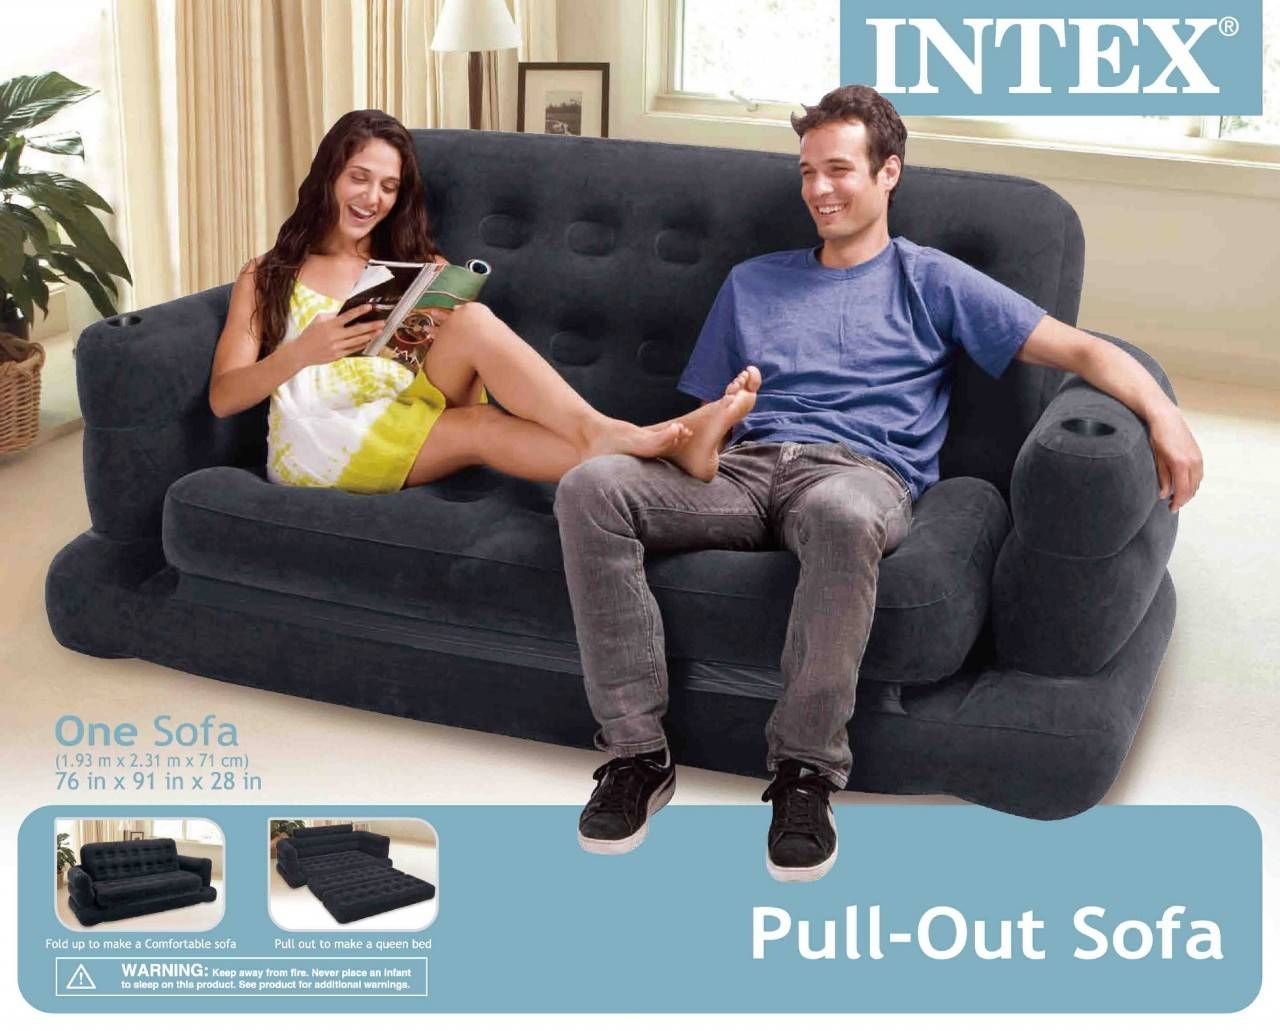 Featured Photo of  Best 15+ of Intex Inflatable Pull Out Sofas